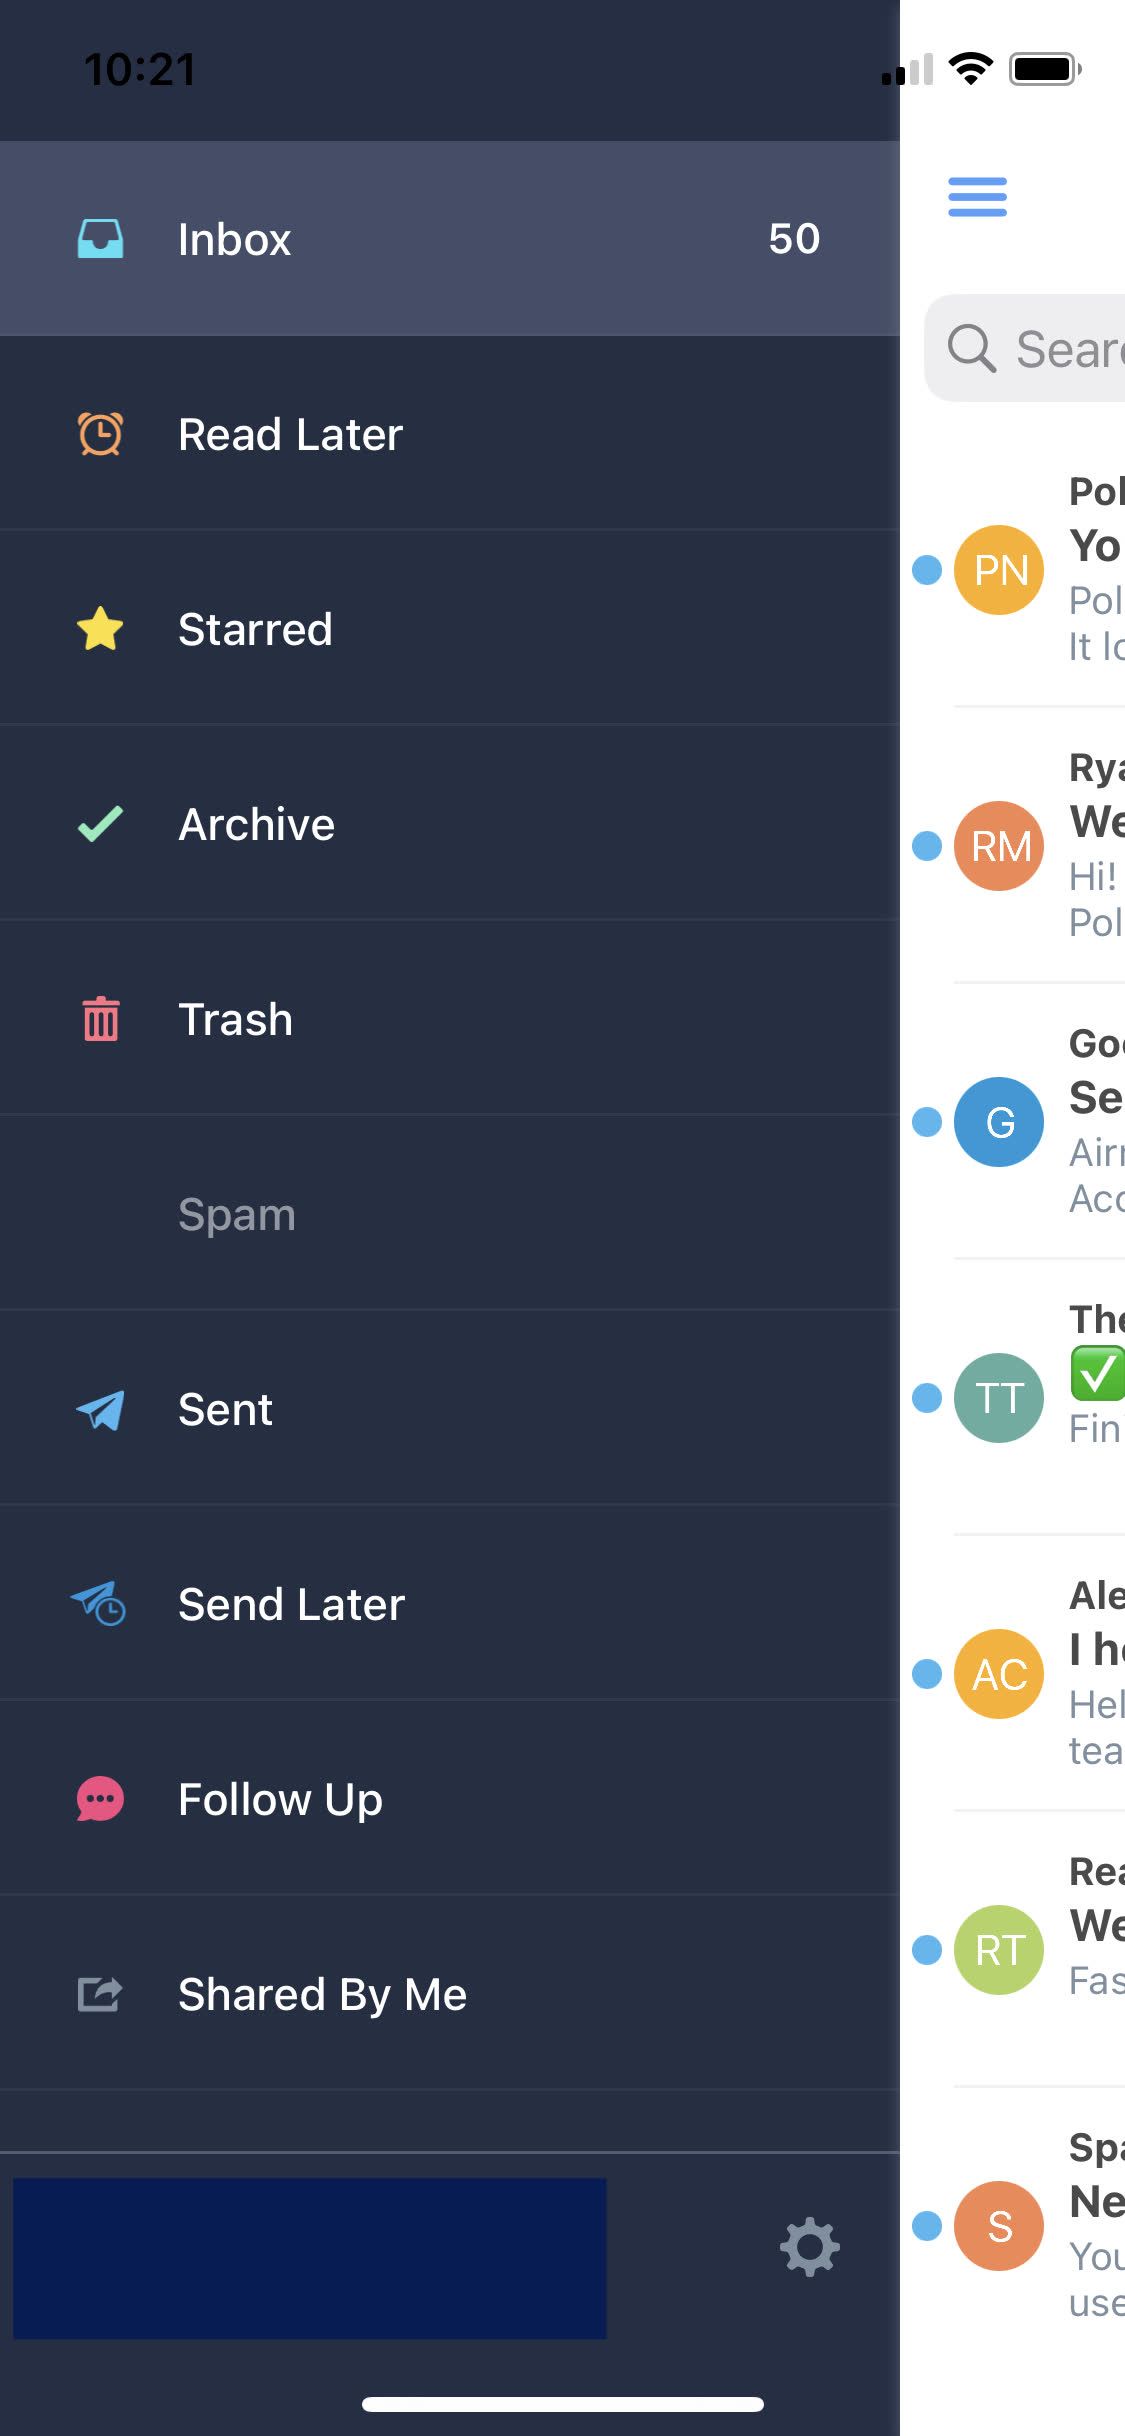 polymail features